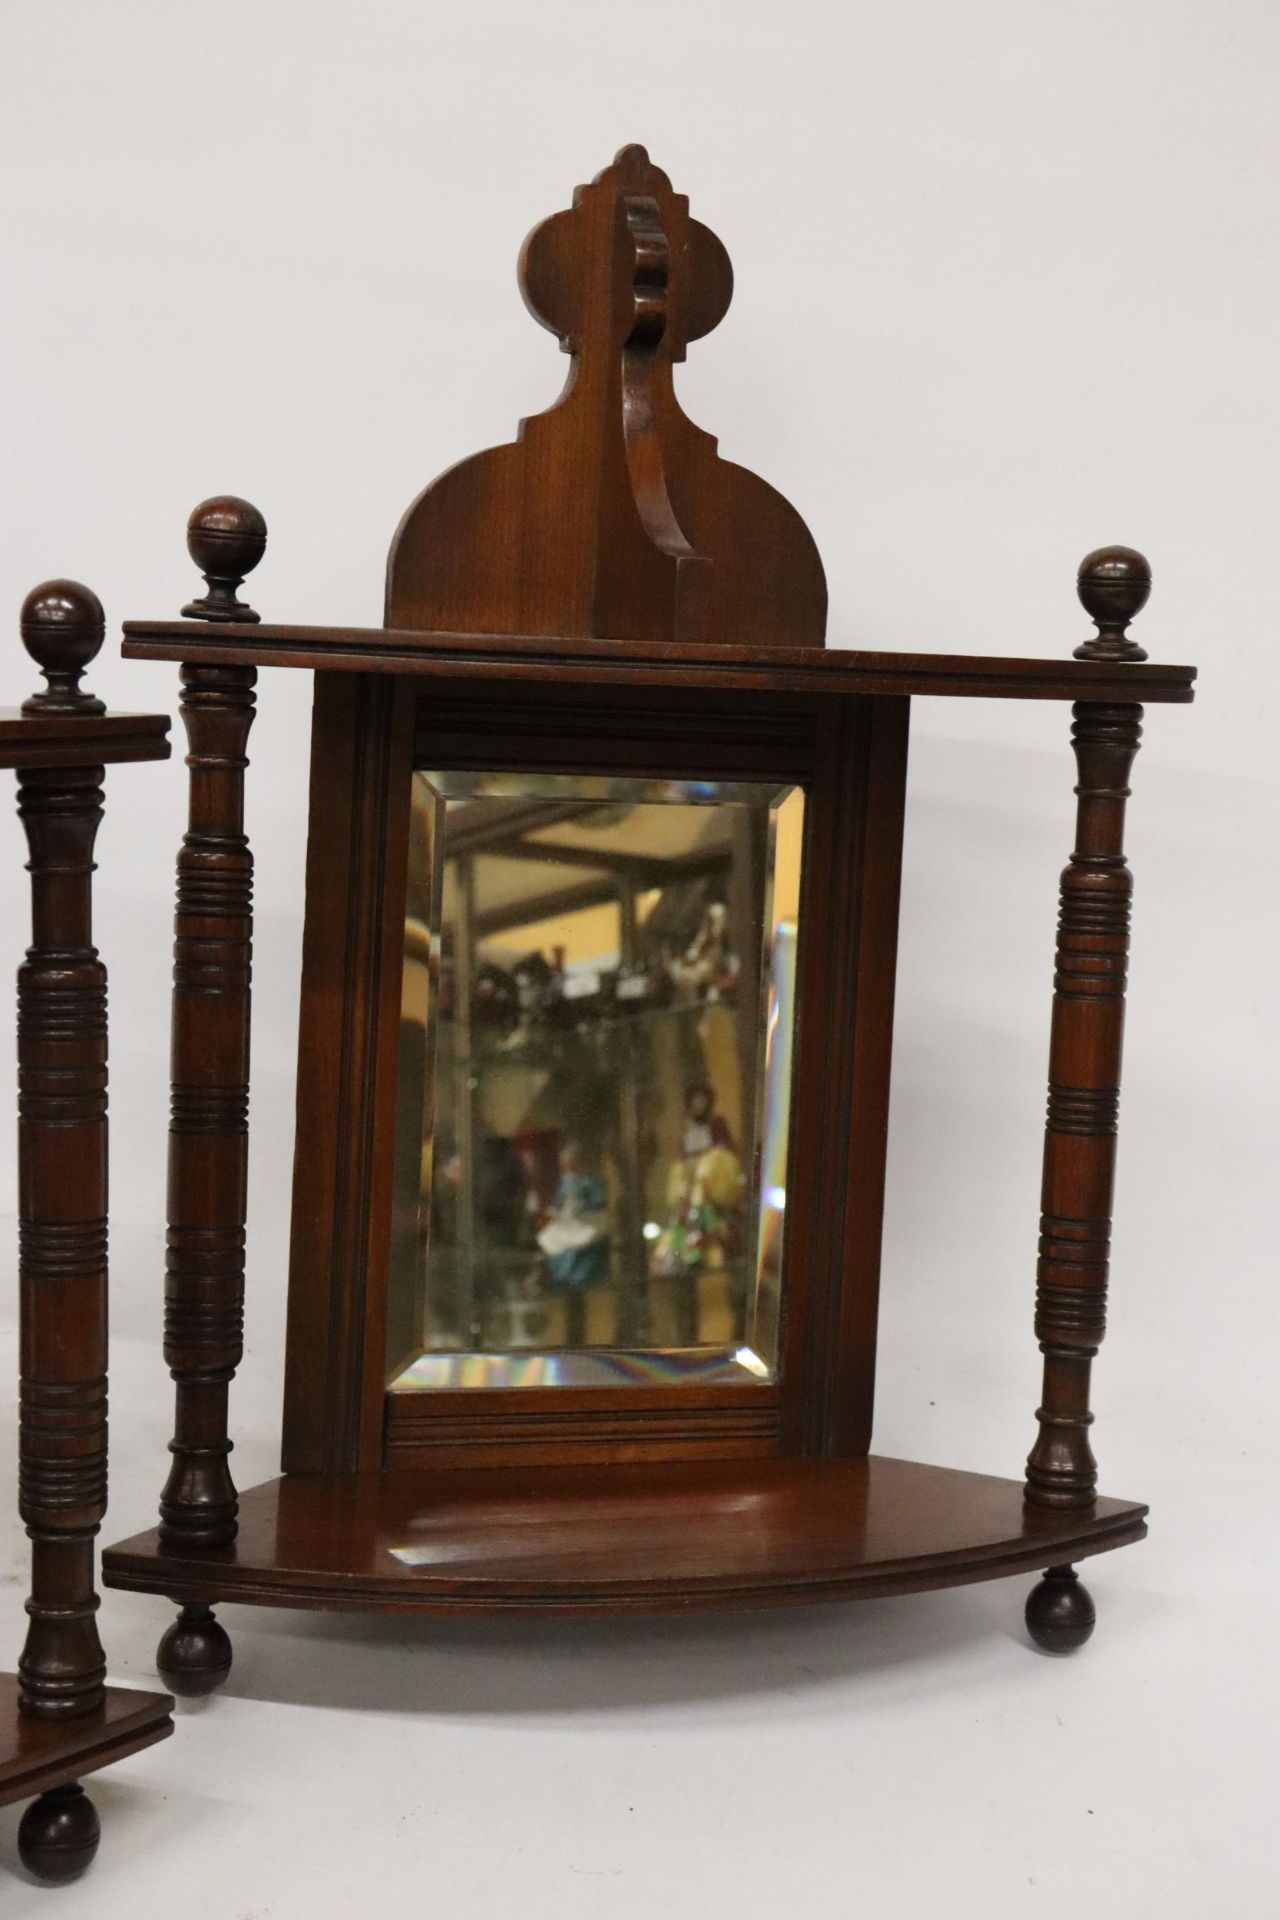 A PAIR OF EDWARDIAN MAHOGANY MIRRORED CORNER SHELVES WITH TURNED COLUMNS - Image 3 of 6